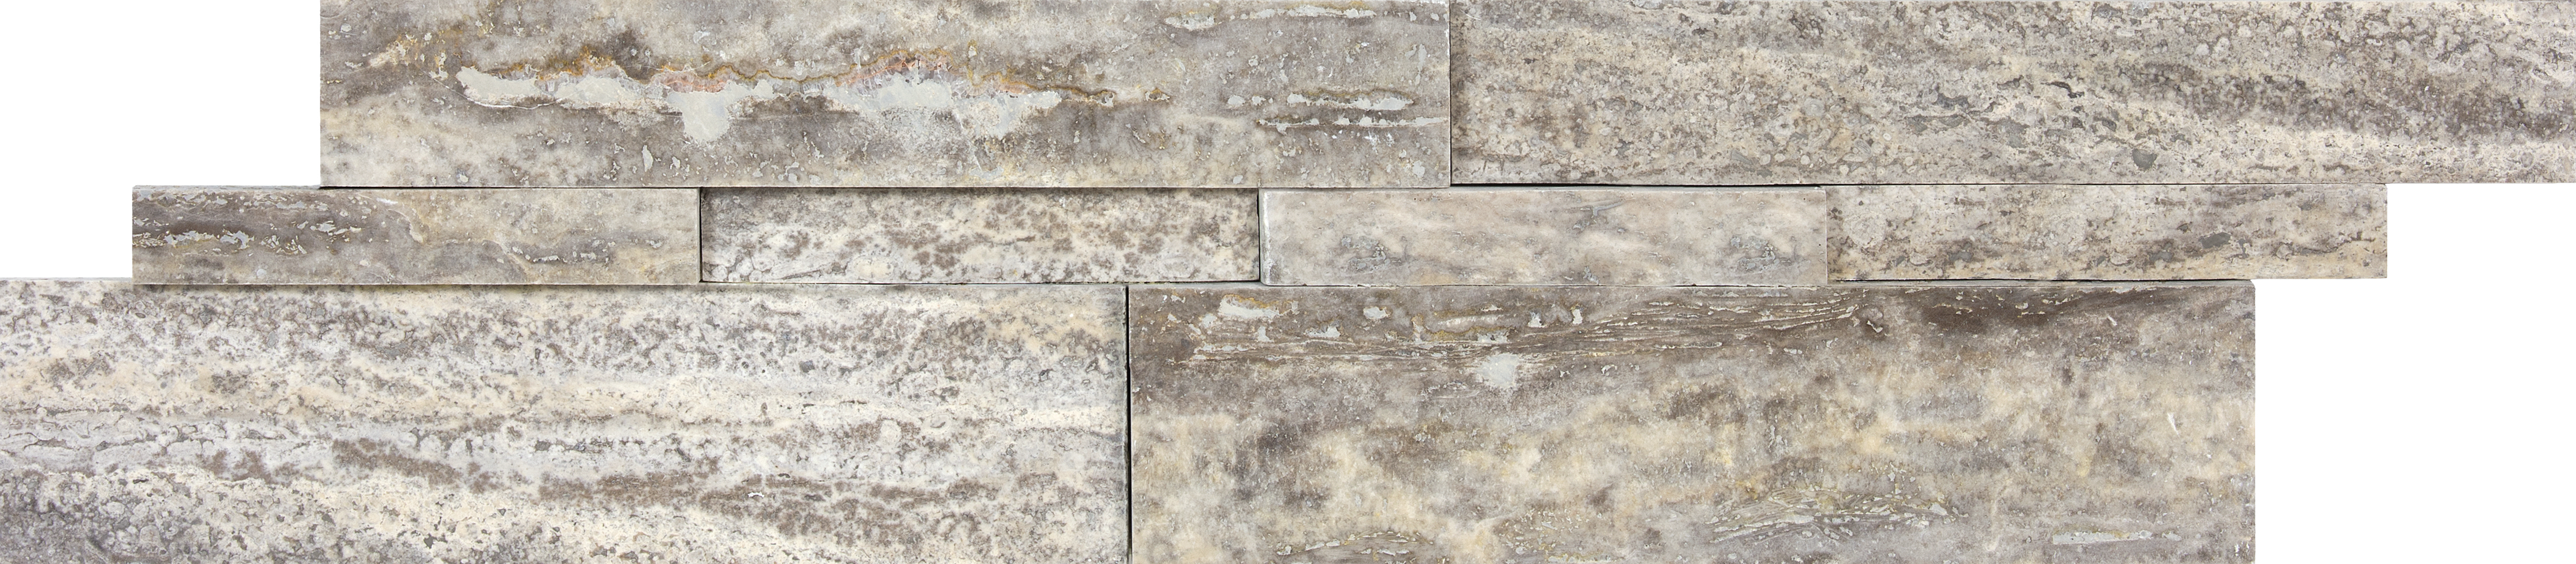 travertine silver ash pattern natural stone wall panel from cubics anatolia collection distributed by surface group international honed finish straight edge edge 6x24 interlocking shape